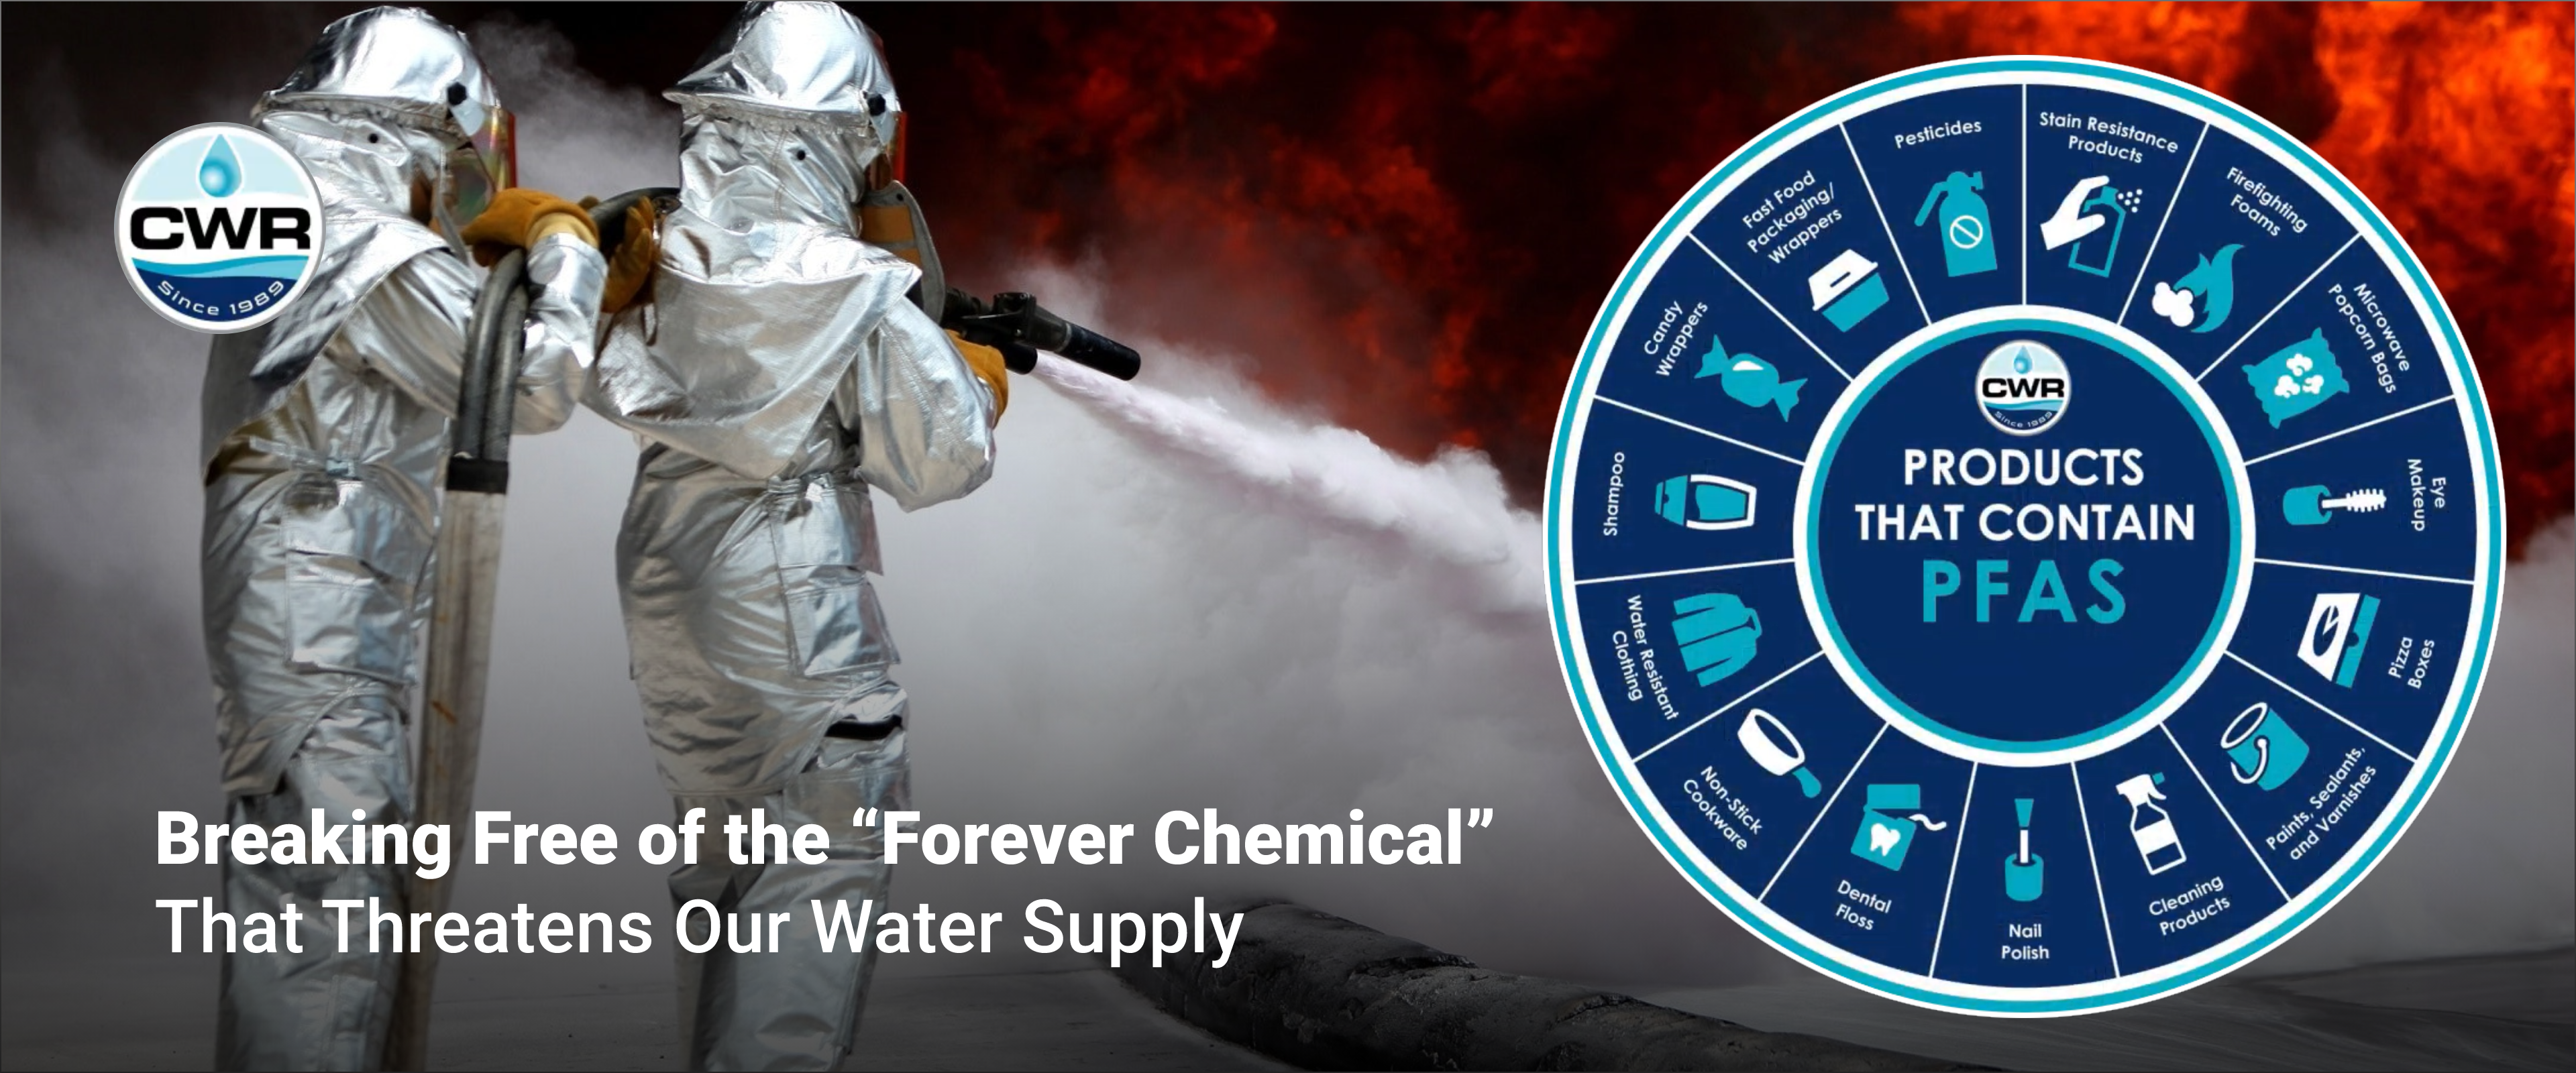 Breaking Free of the “Forever Chemical” That Threatens Our Water